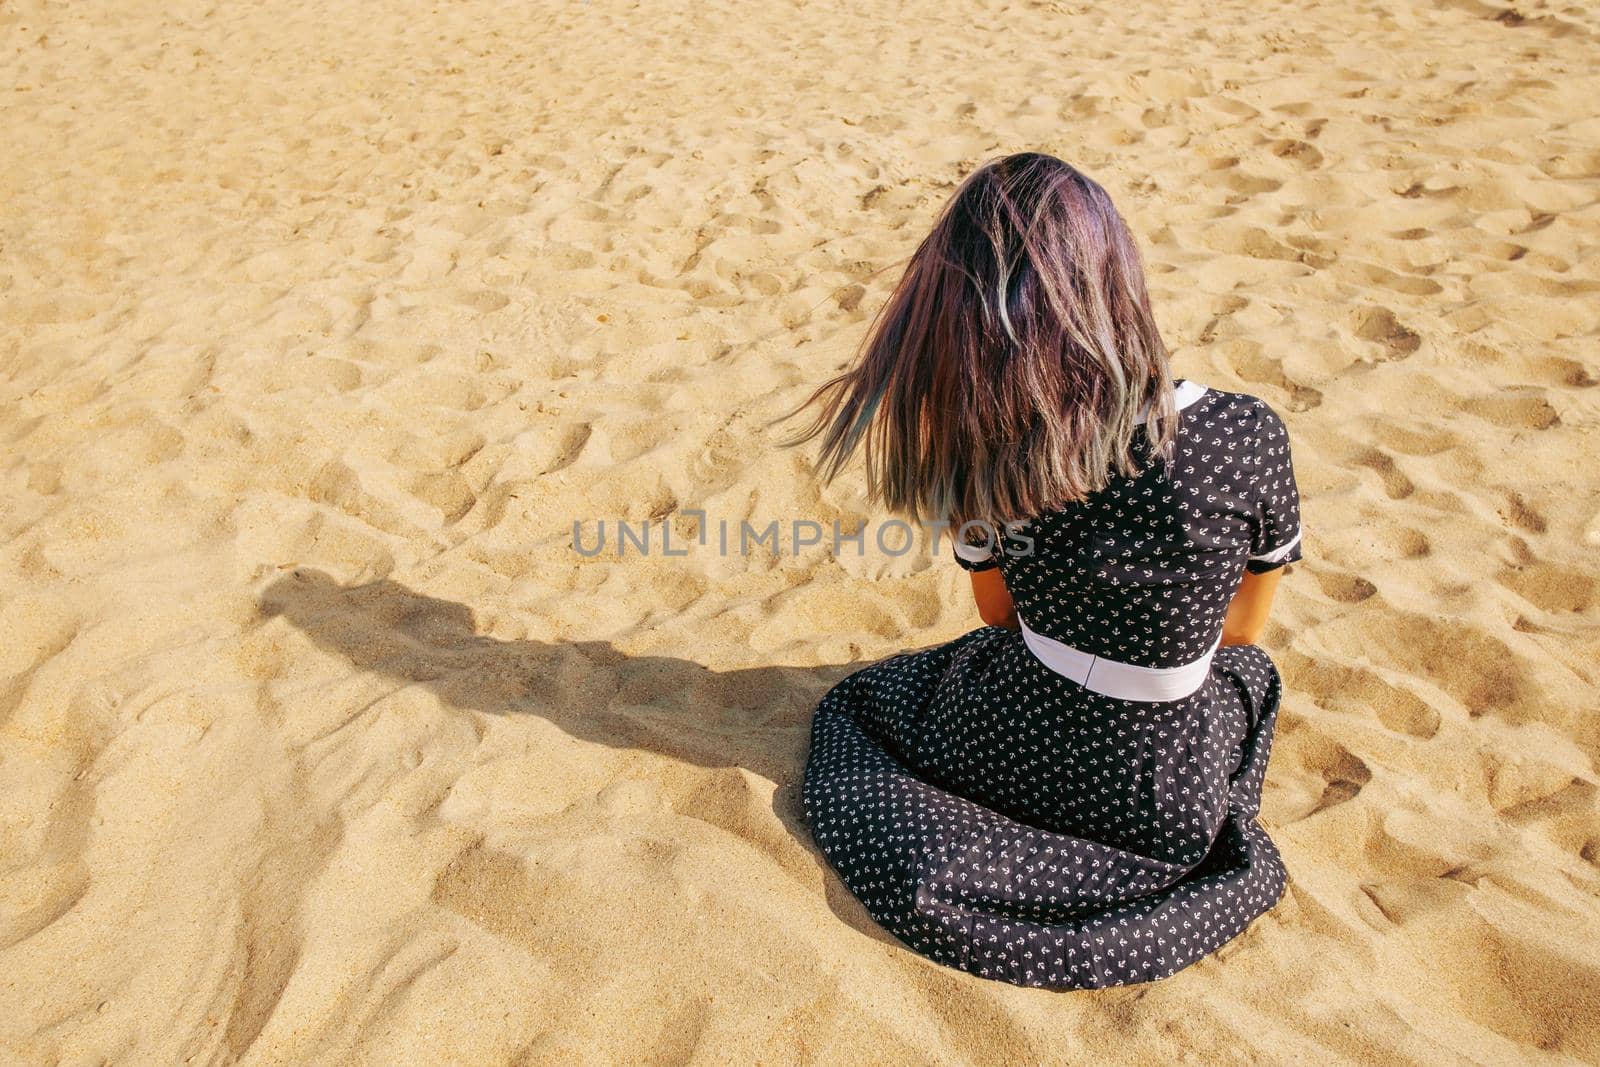 Unrecognizable young woman resting on sand, rear view.